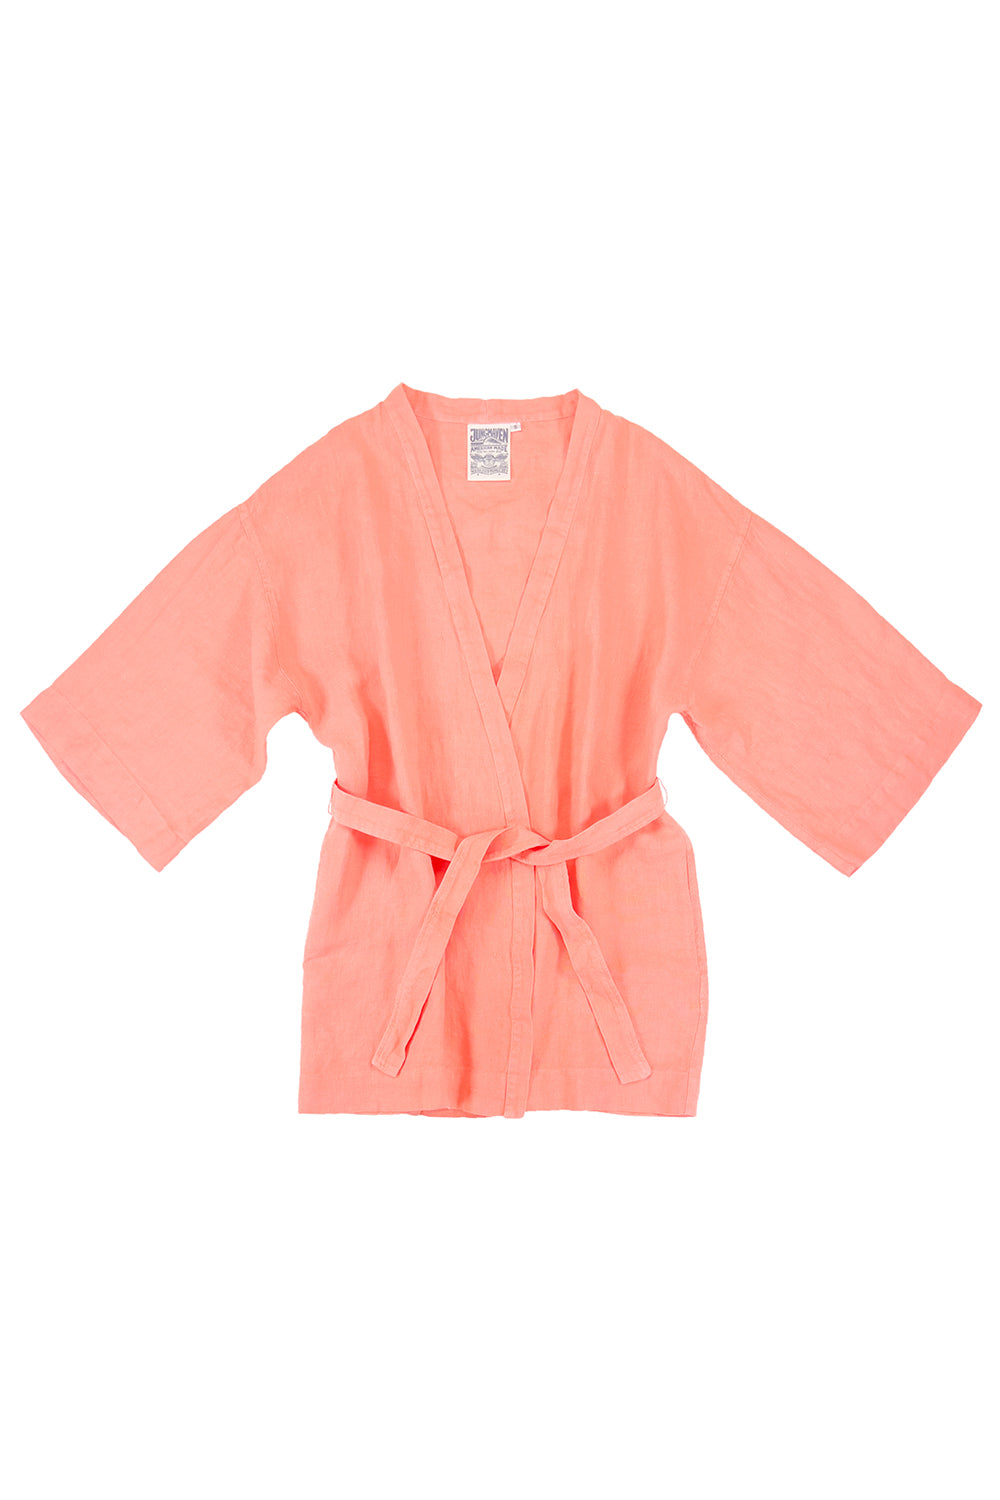 Bali Cover-up | Jungmaven Hemp Clothing & Accessories / Color: Pink Salmon